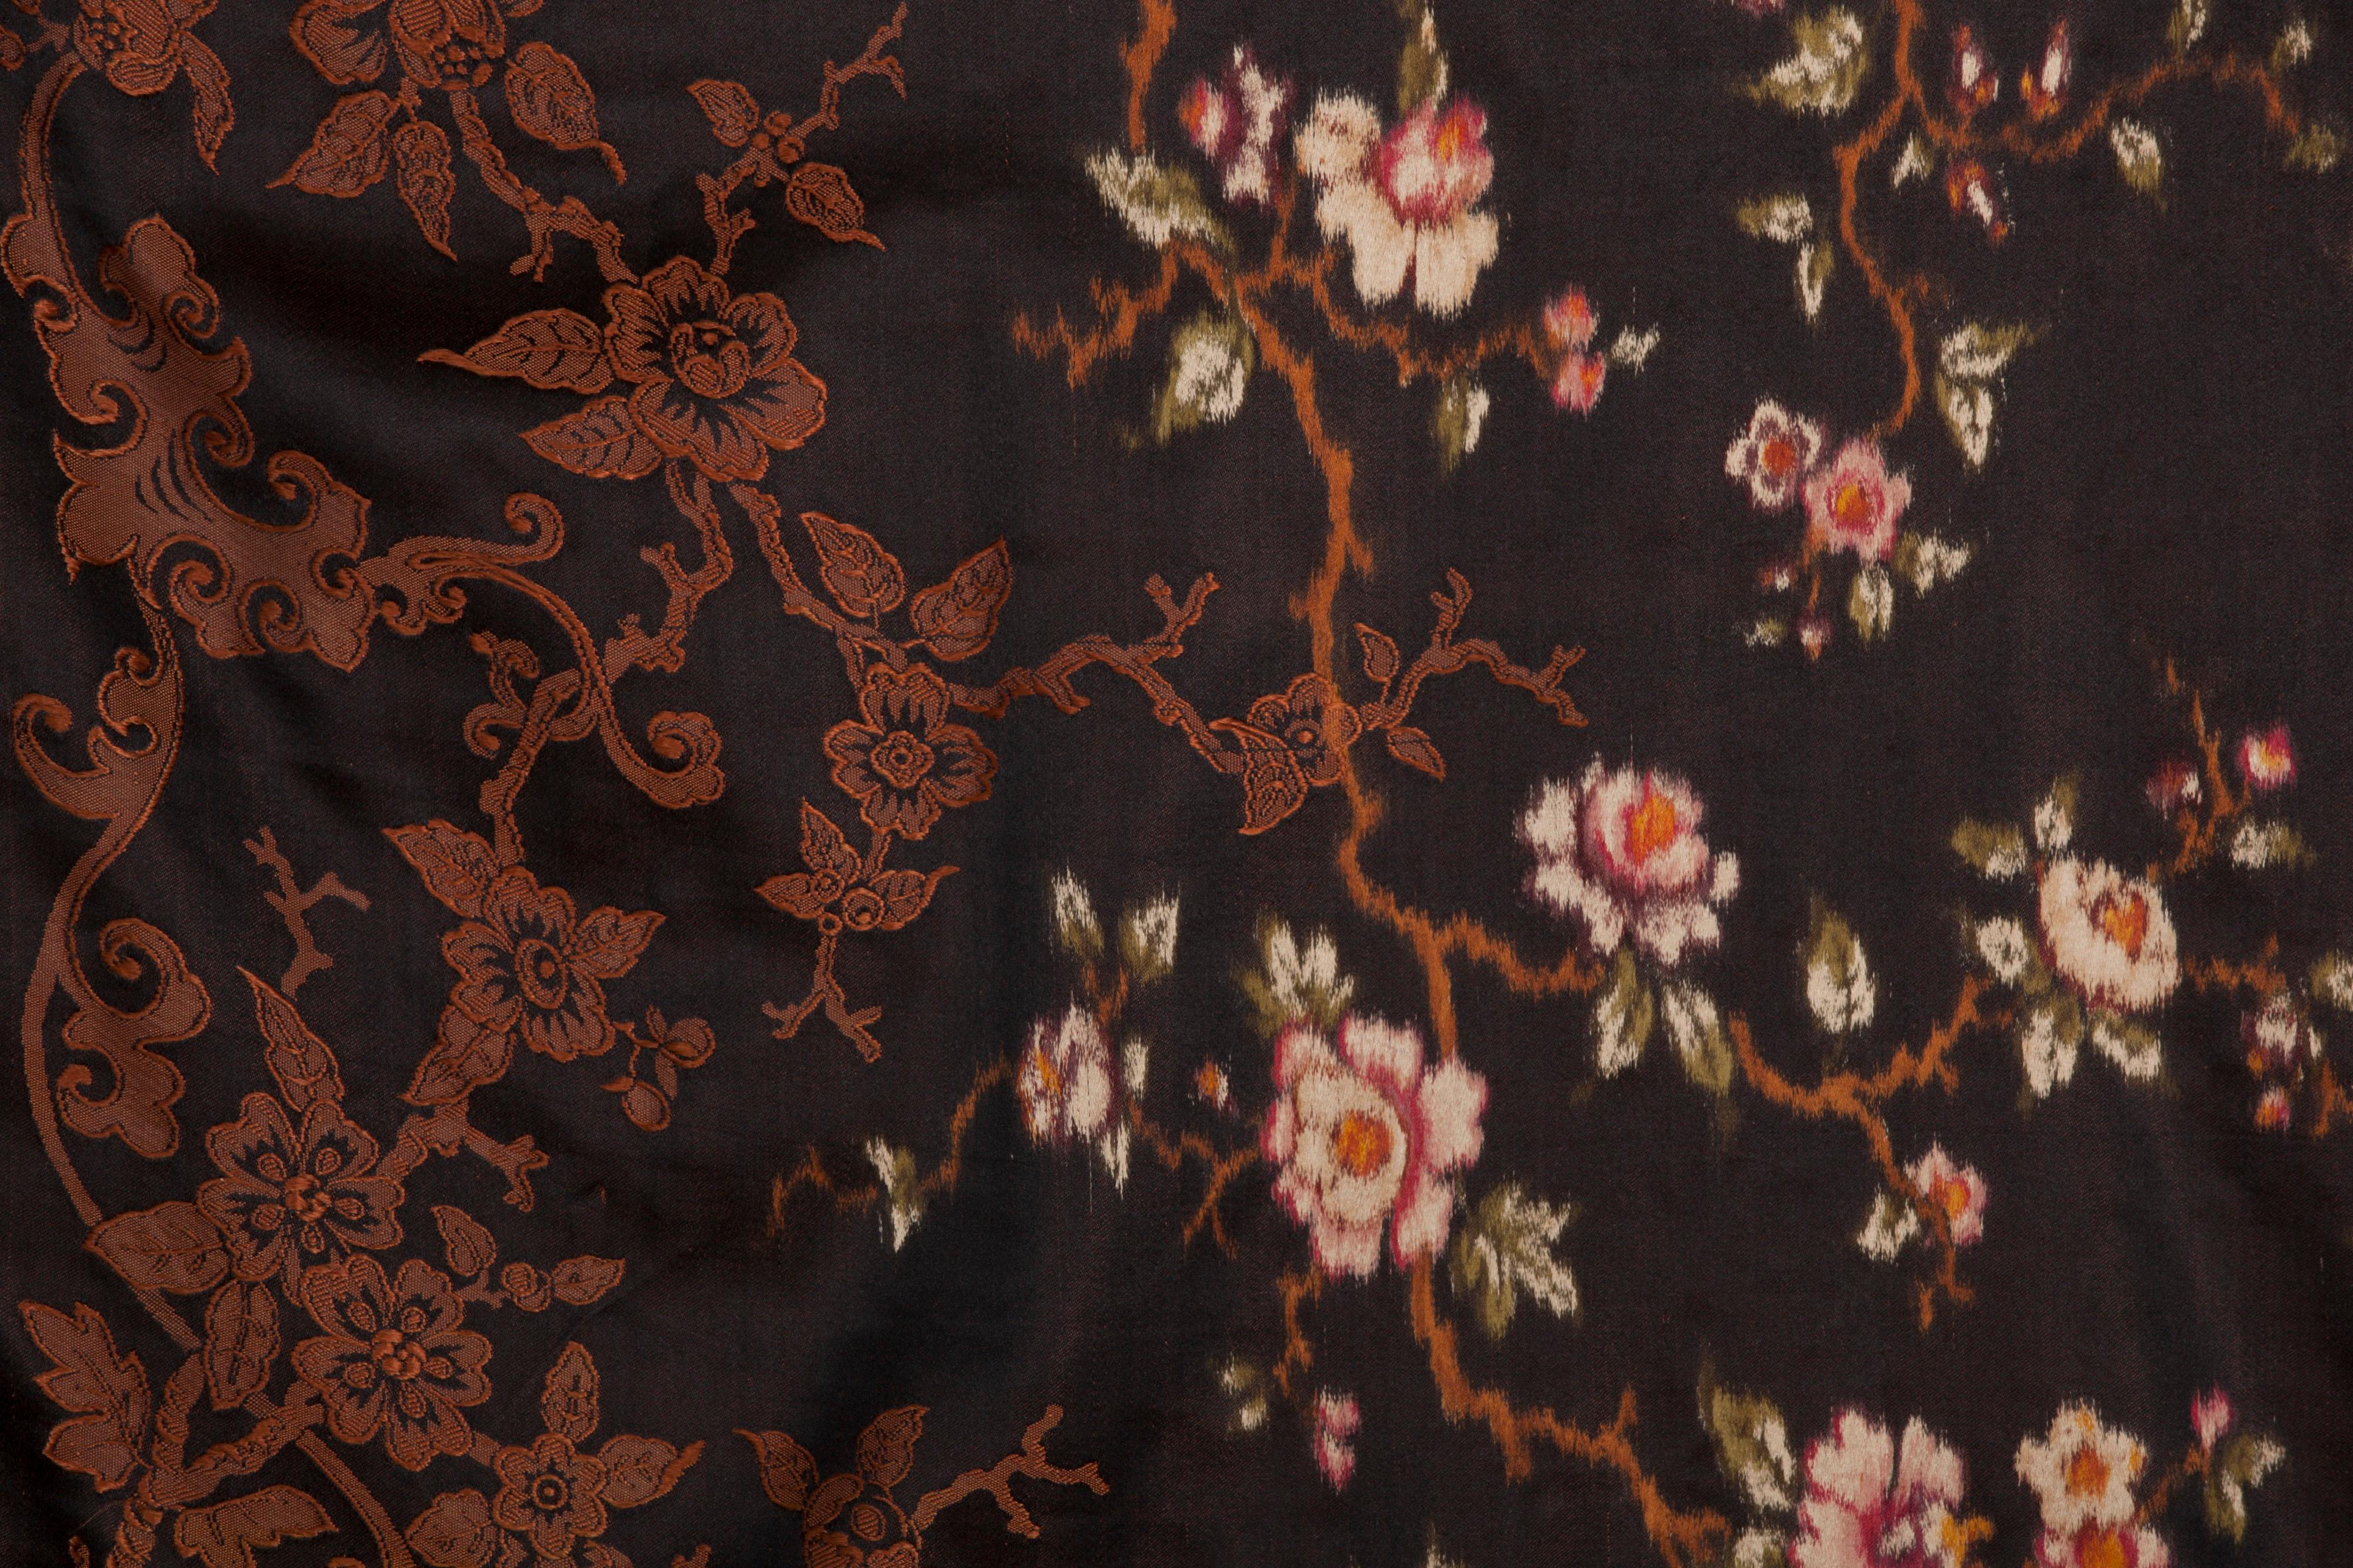 European Mid-19th Century French Silk Chiné Shawl For Sale